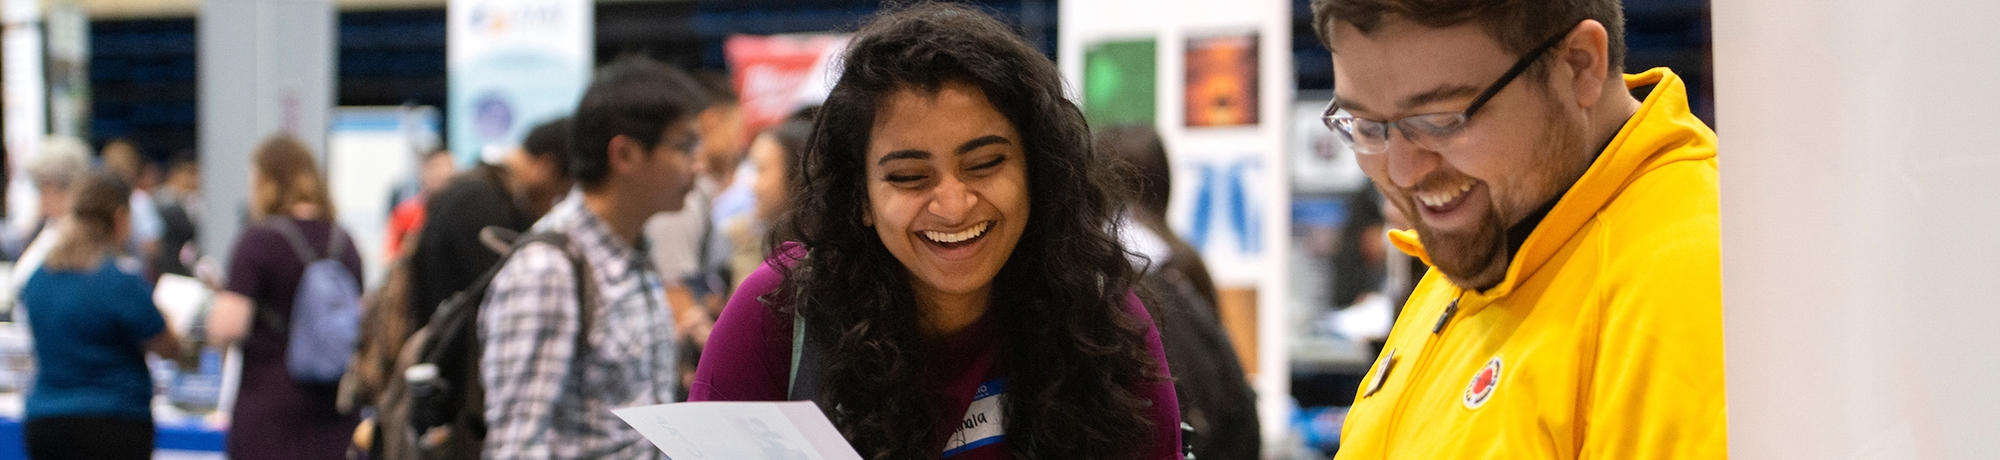 Two people smiling while laughing when looking a paper at a career fair with visible booths behind.